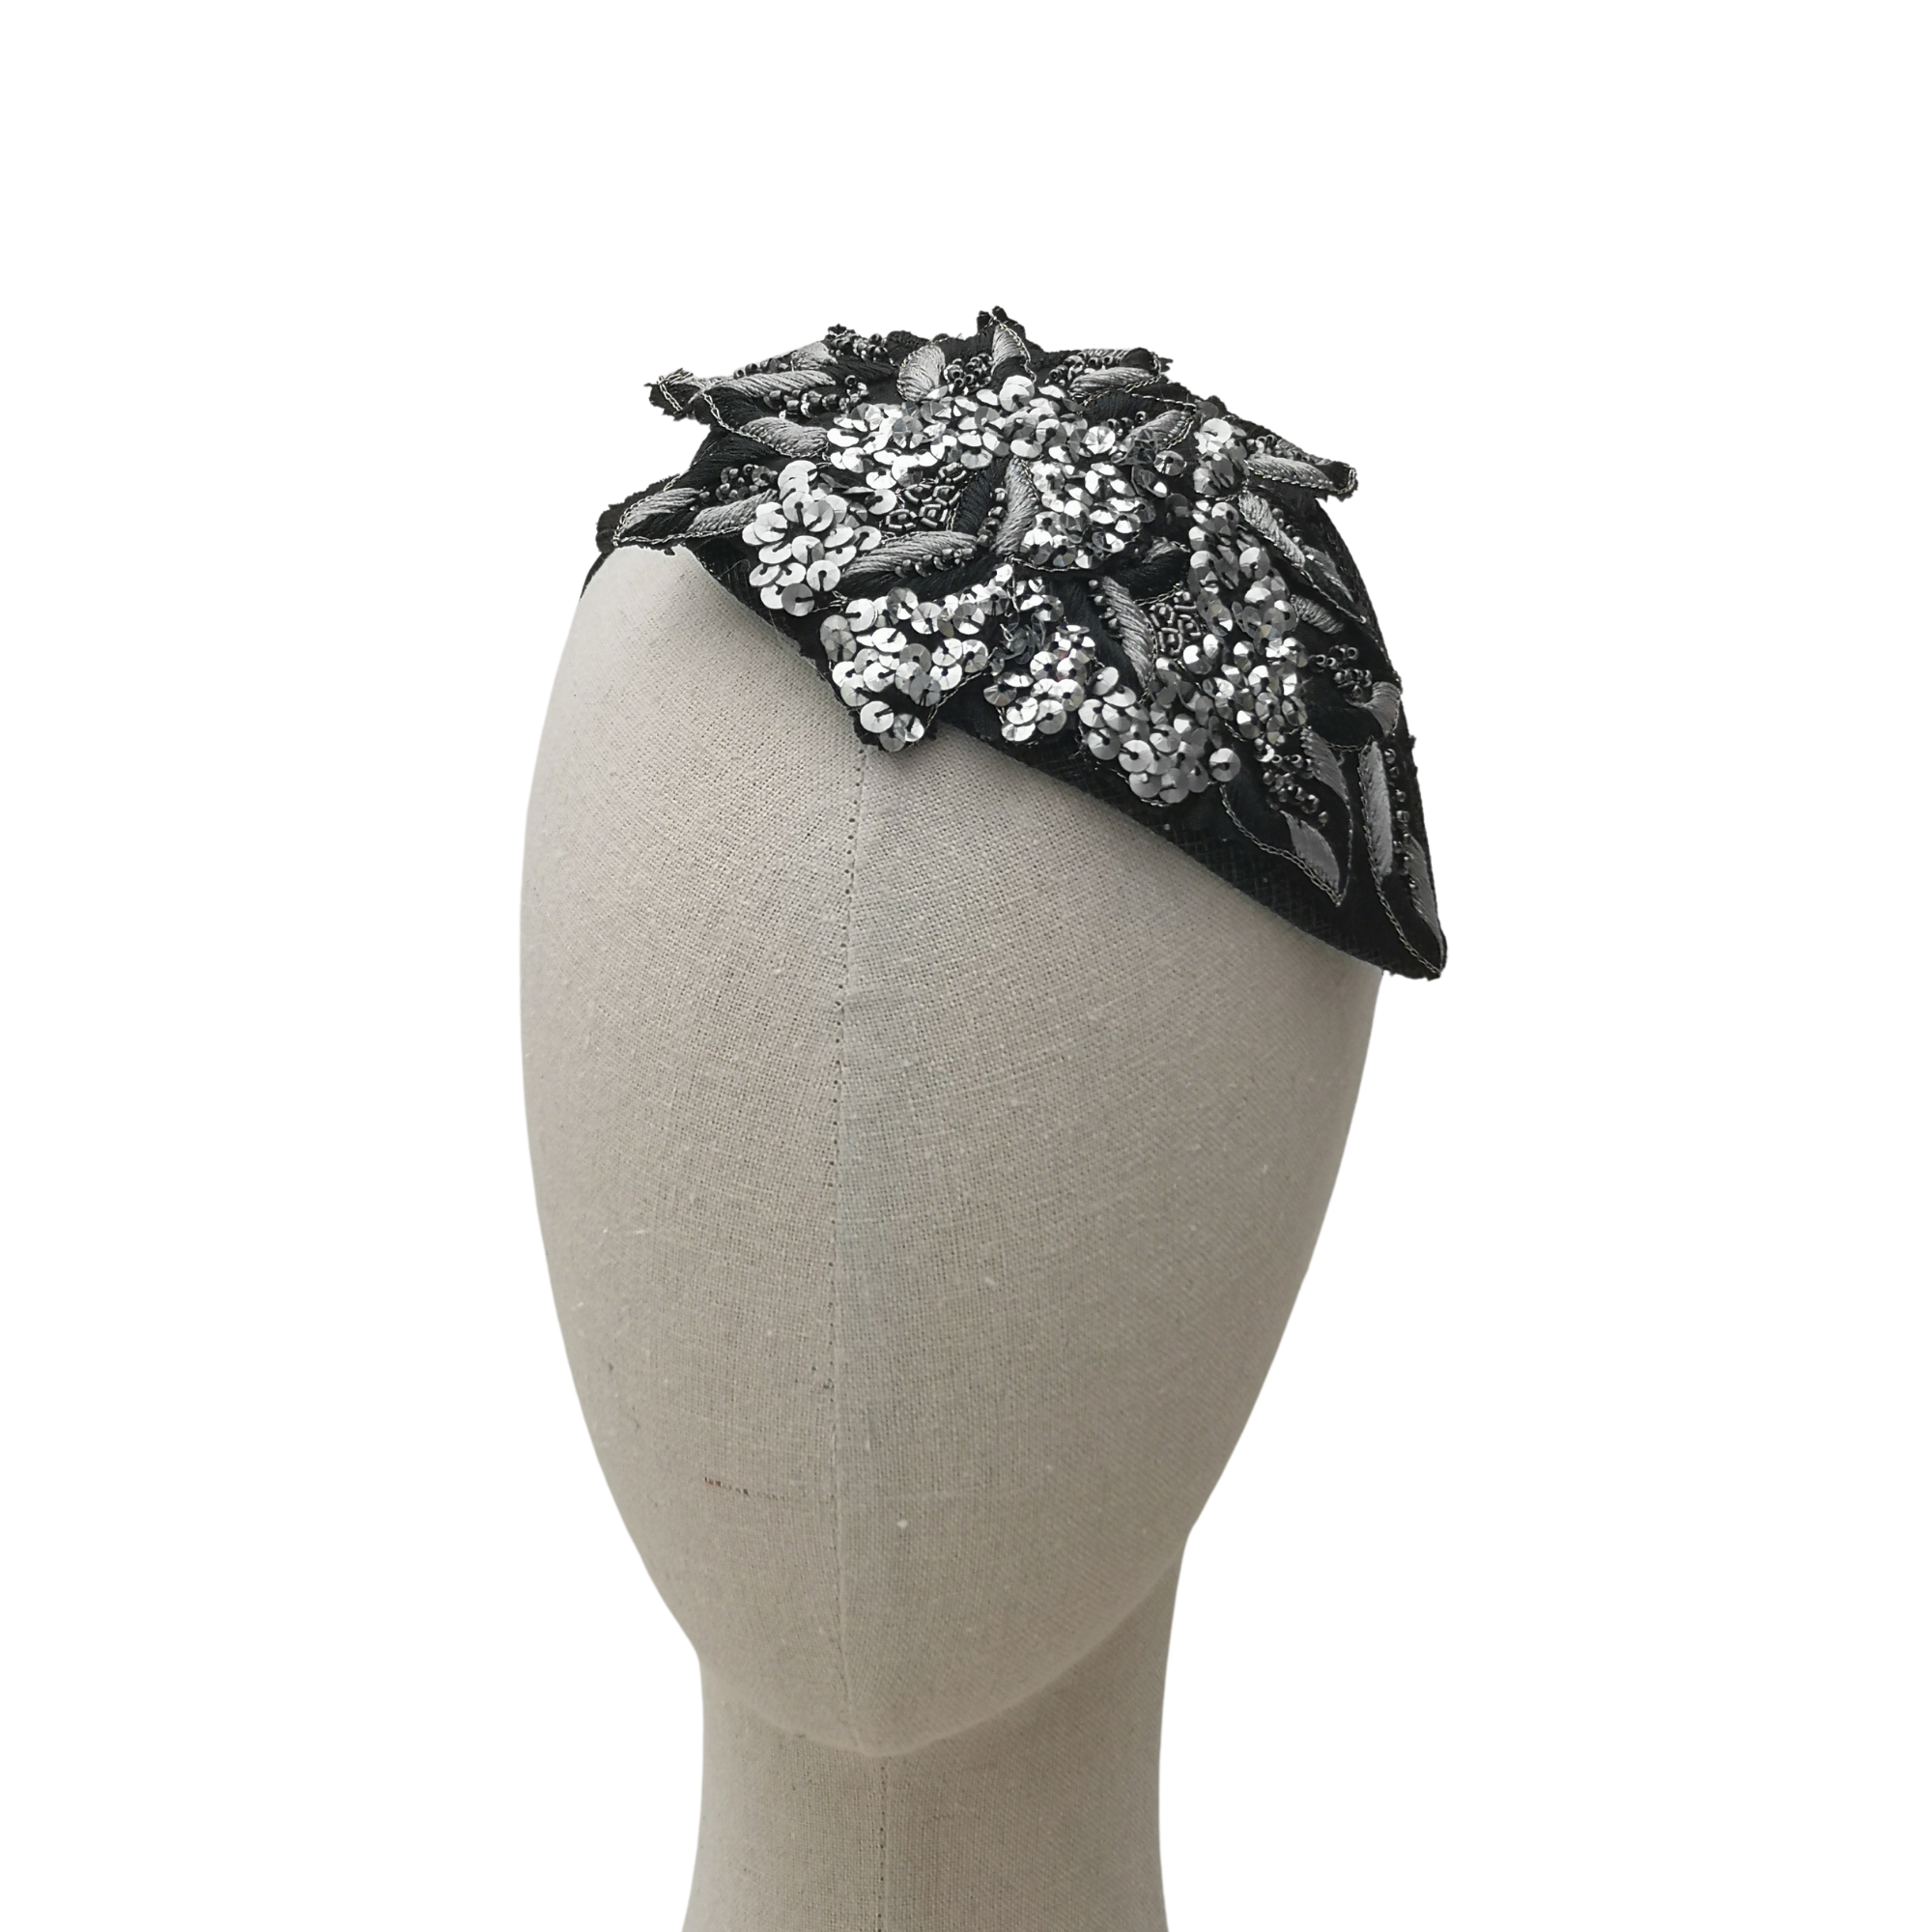 Black and silver gatsby headpiece